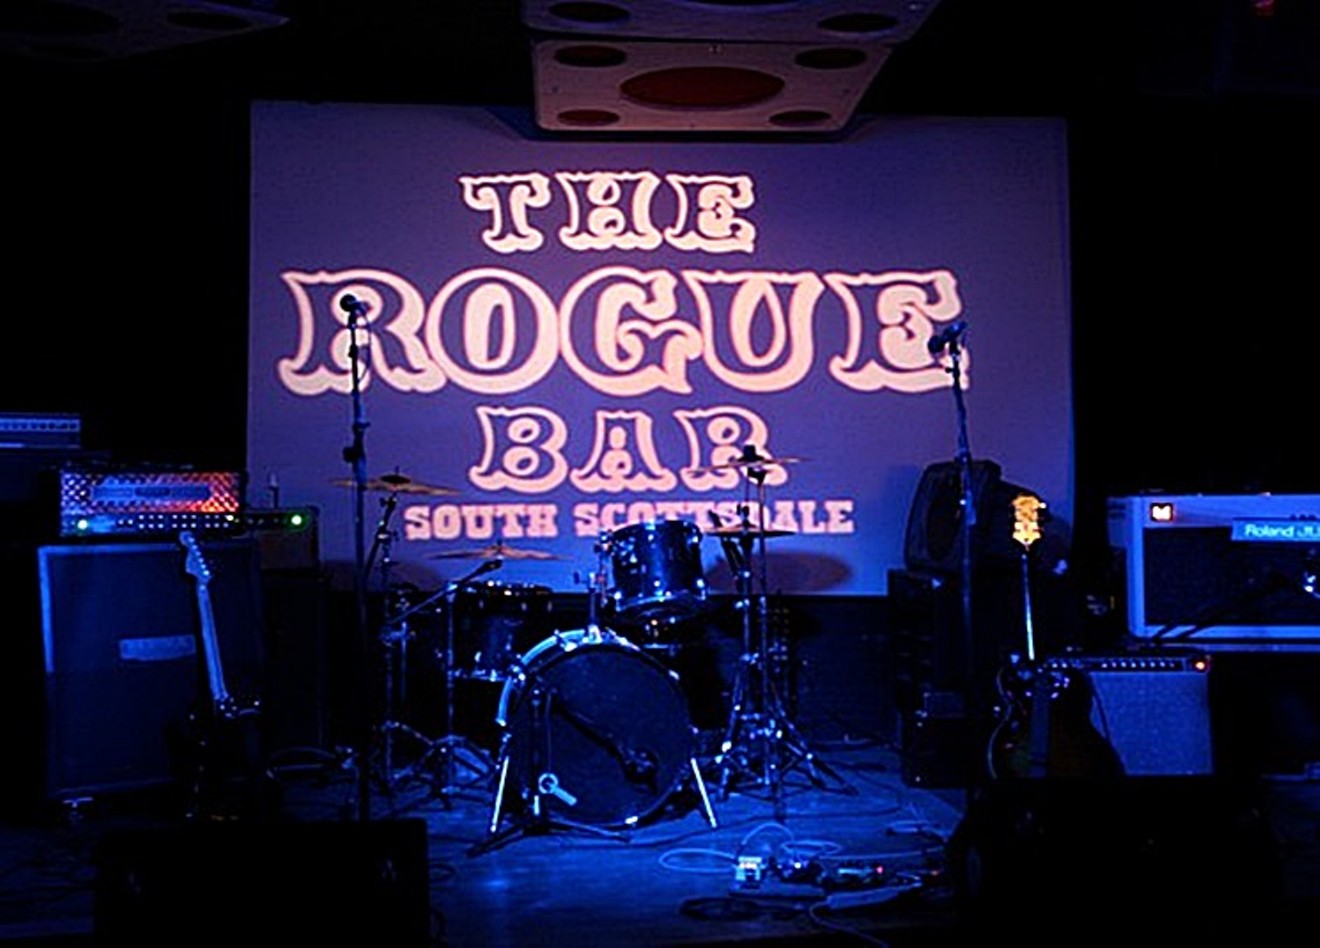 Say your farewells to The Rogue Bar. It's closing on May 1.